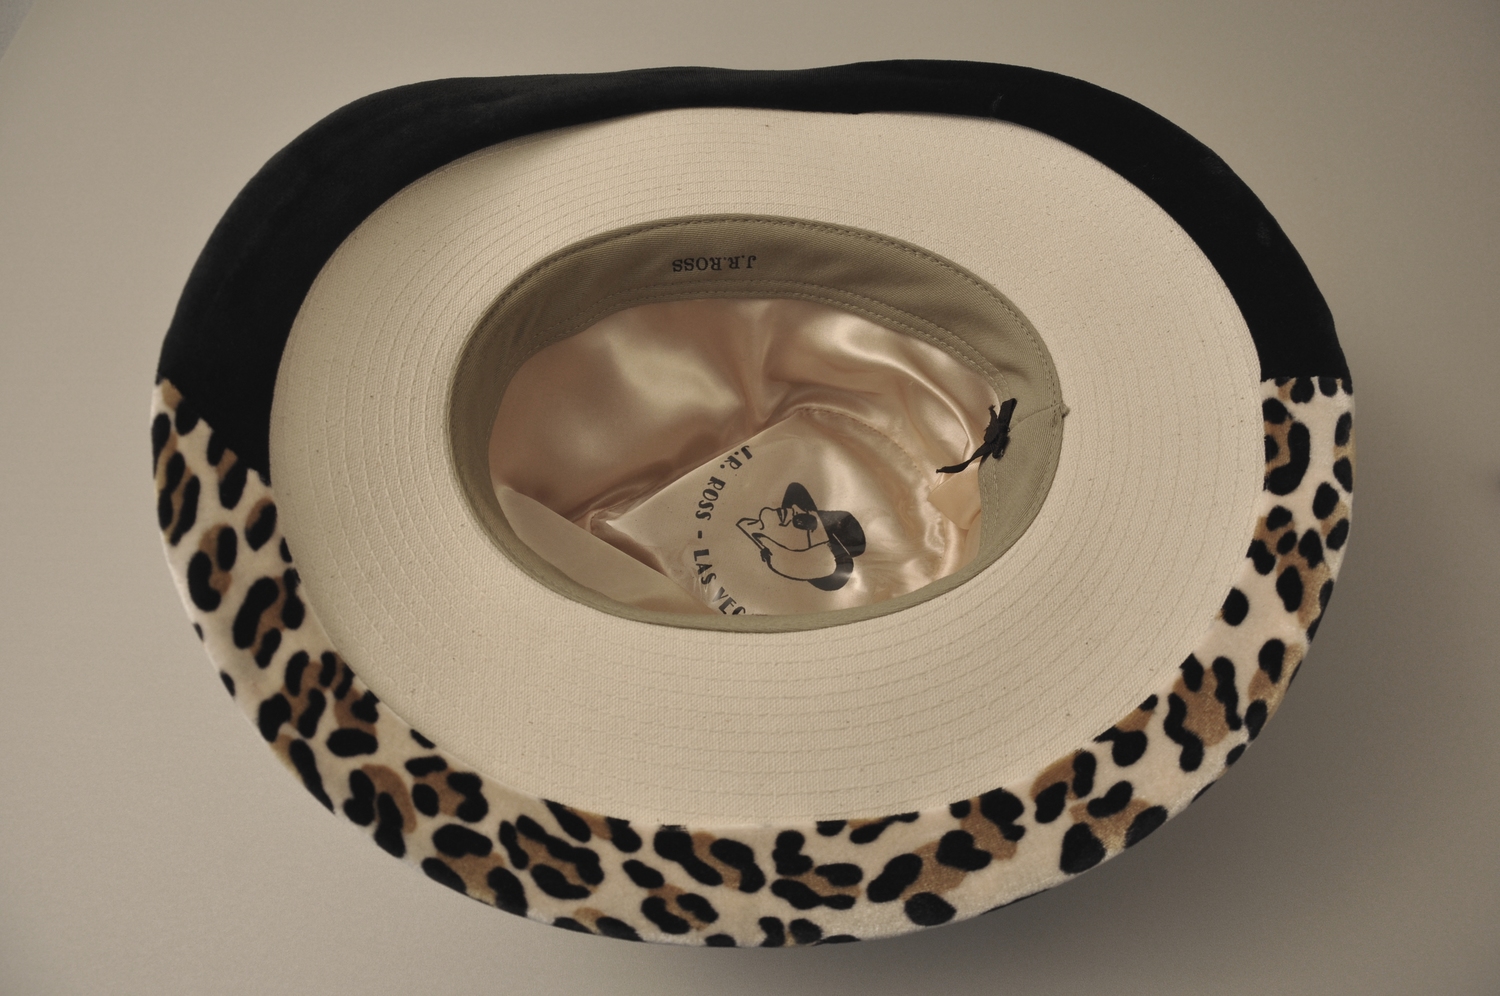 White Fedora leopard pattern, owend and worn by David Bowie - currently on display and part of a David Bowie exhibition showcase at the rock'n'popmuseum Gronau https://www.rock-popmuseum.de/